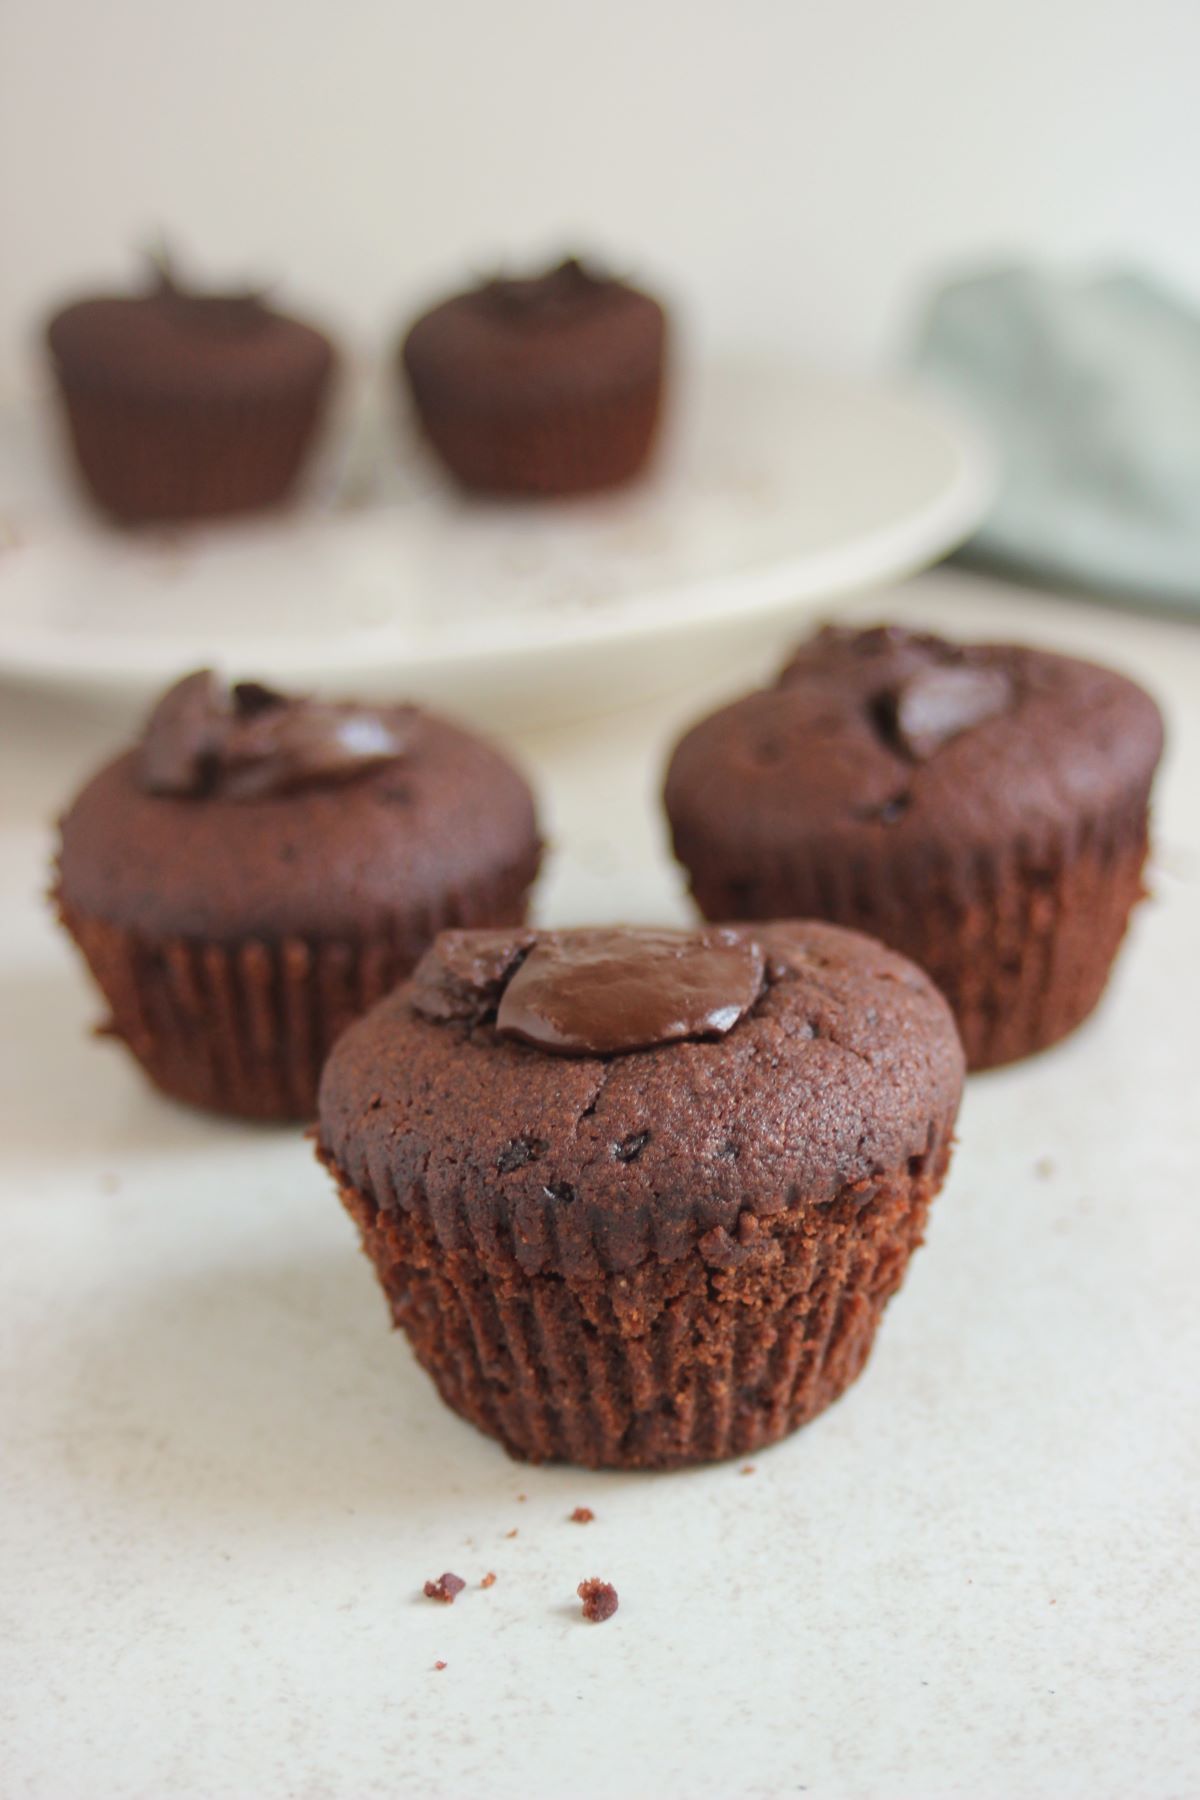 Chocolate muffins on a white surface. More muffins on the background.